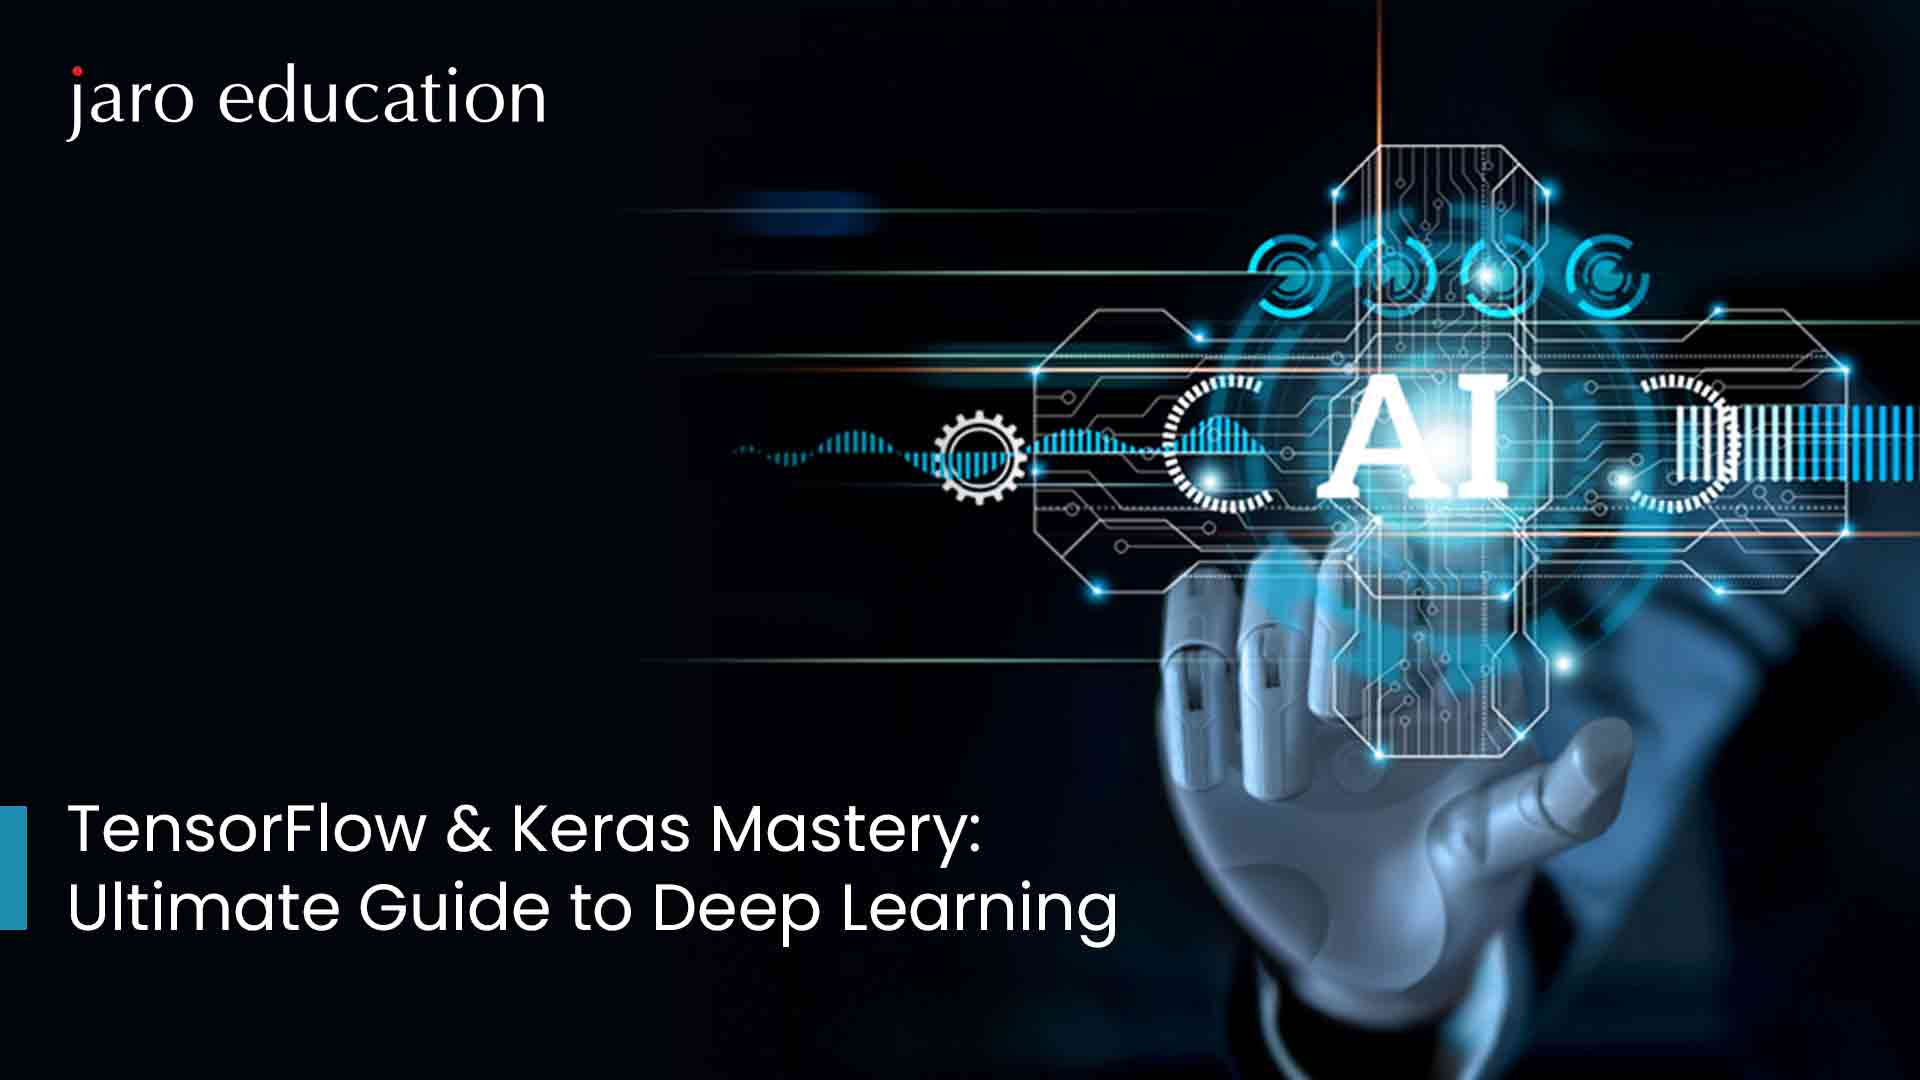 TensorFlow & Keras Mastery Ultimate Guide to Deep Learning